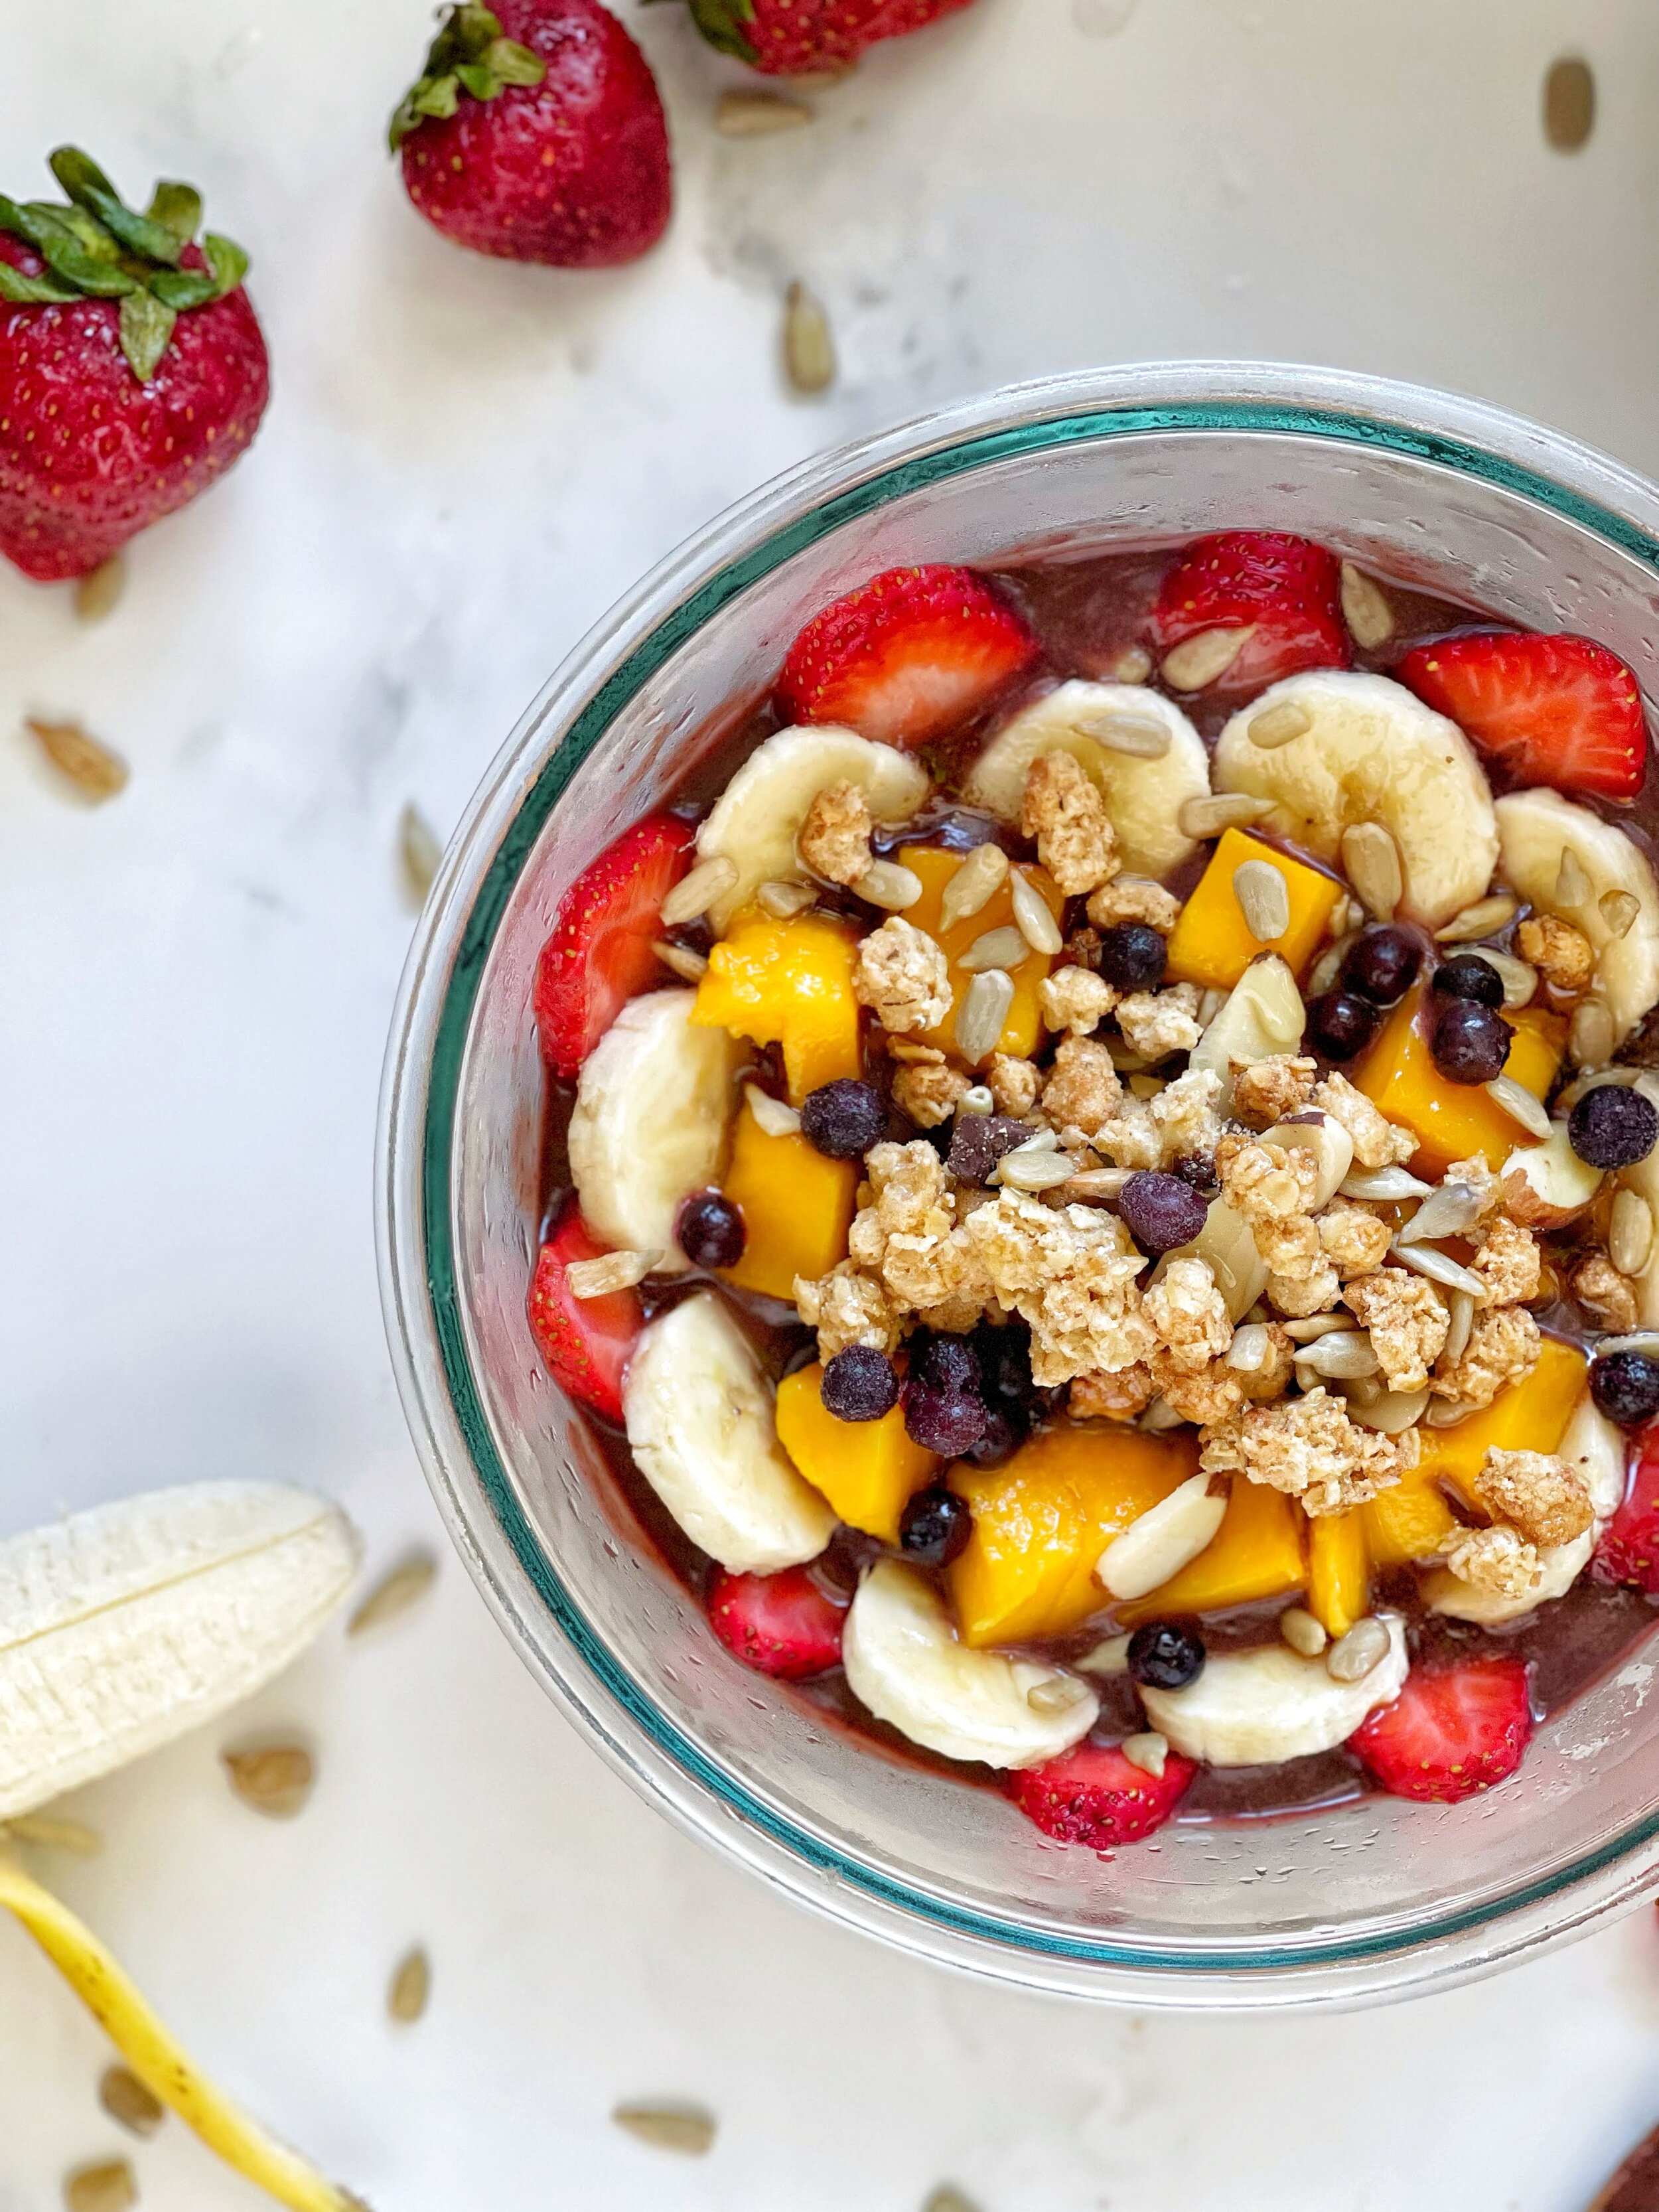 How to Make Acai Bowls at Home - Easy and Customizable!